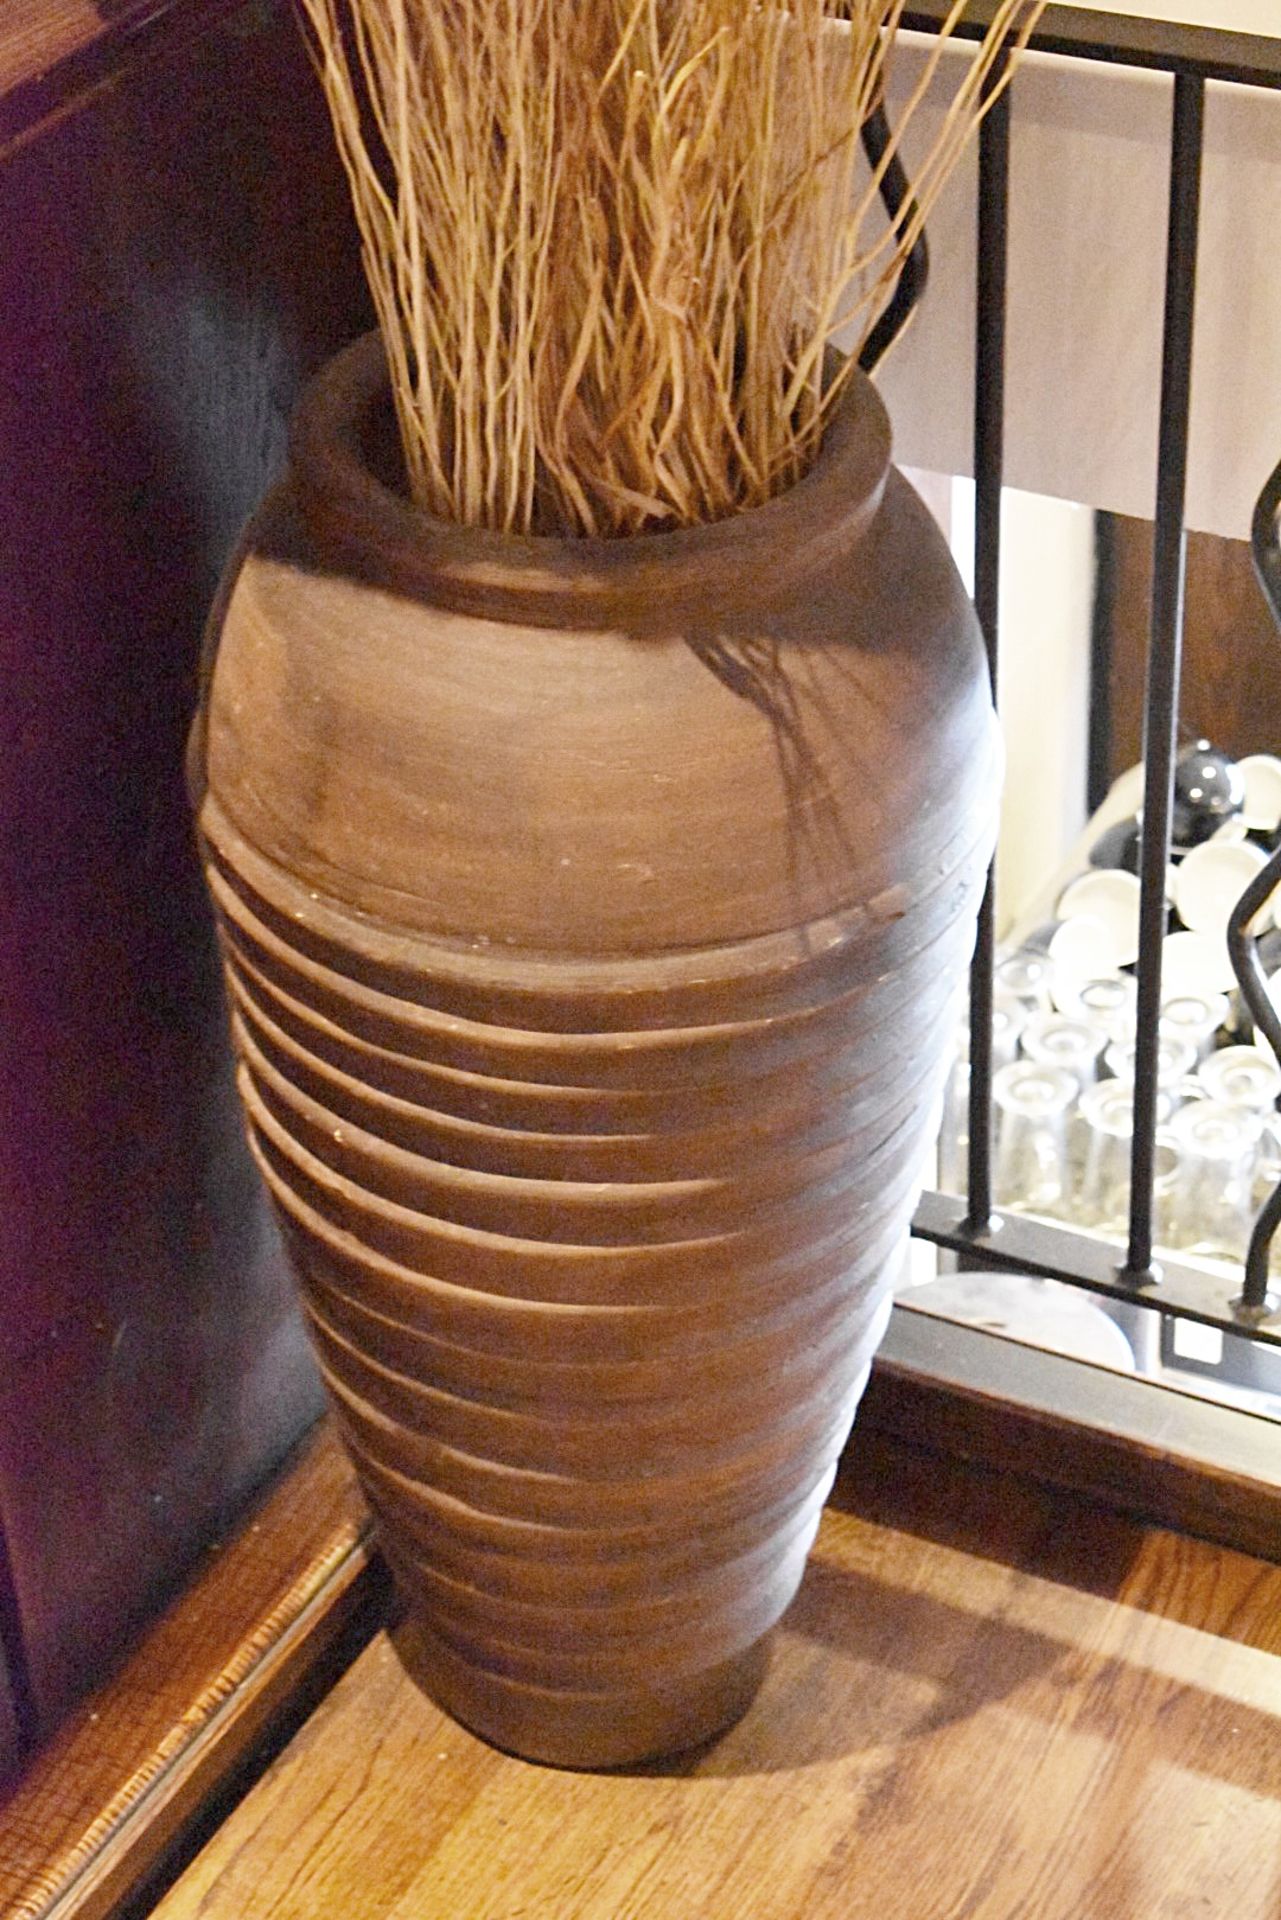 1 x Large Rustic Mexican Style Vase - Image 2 of 2